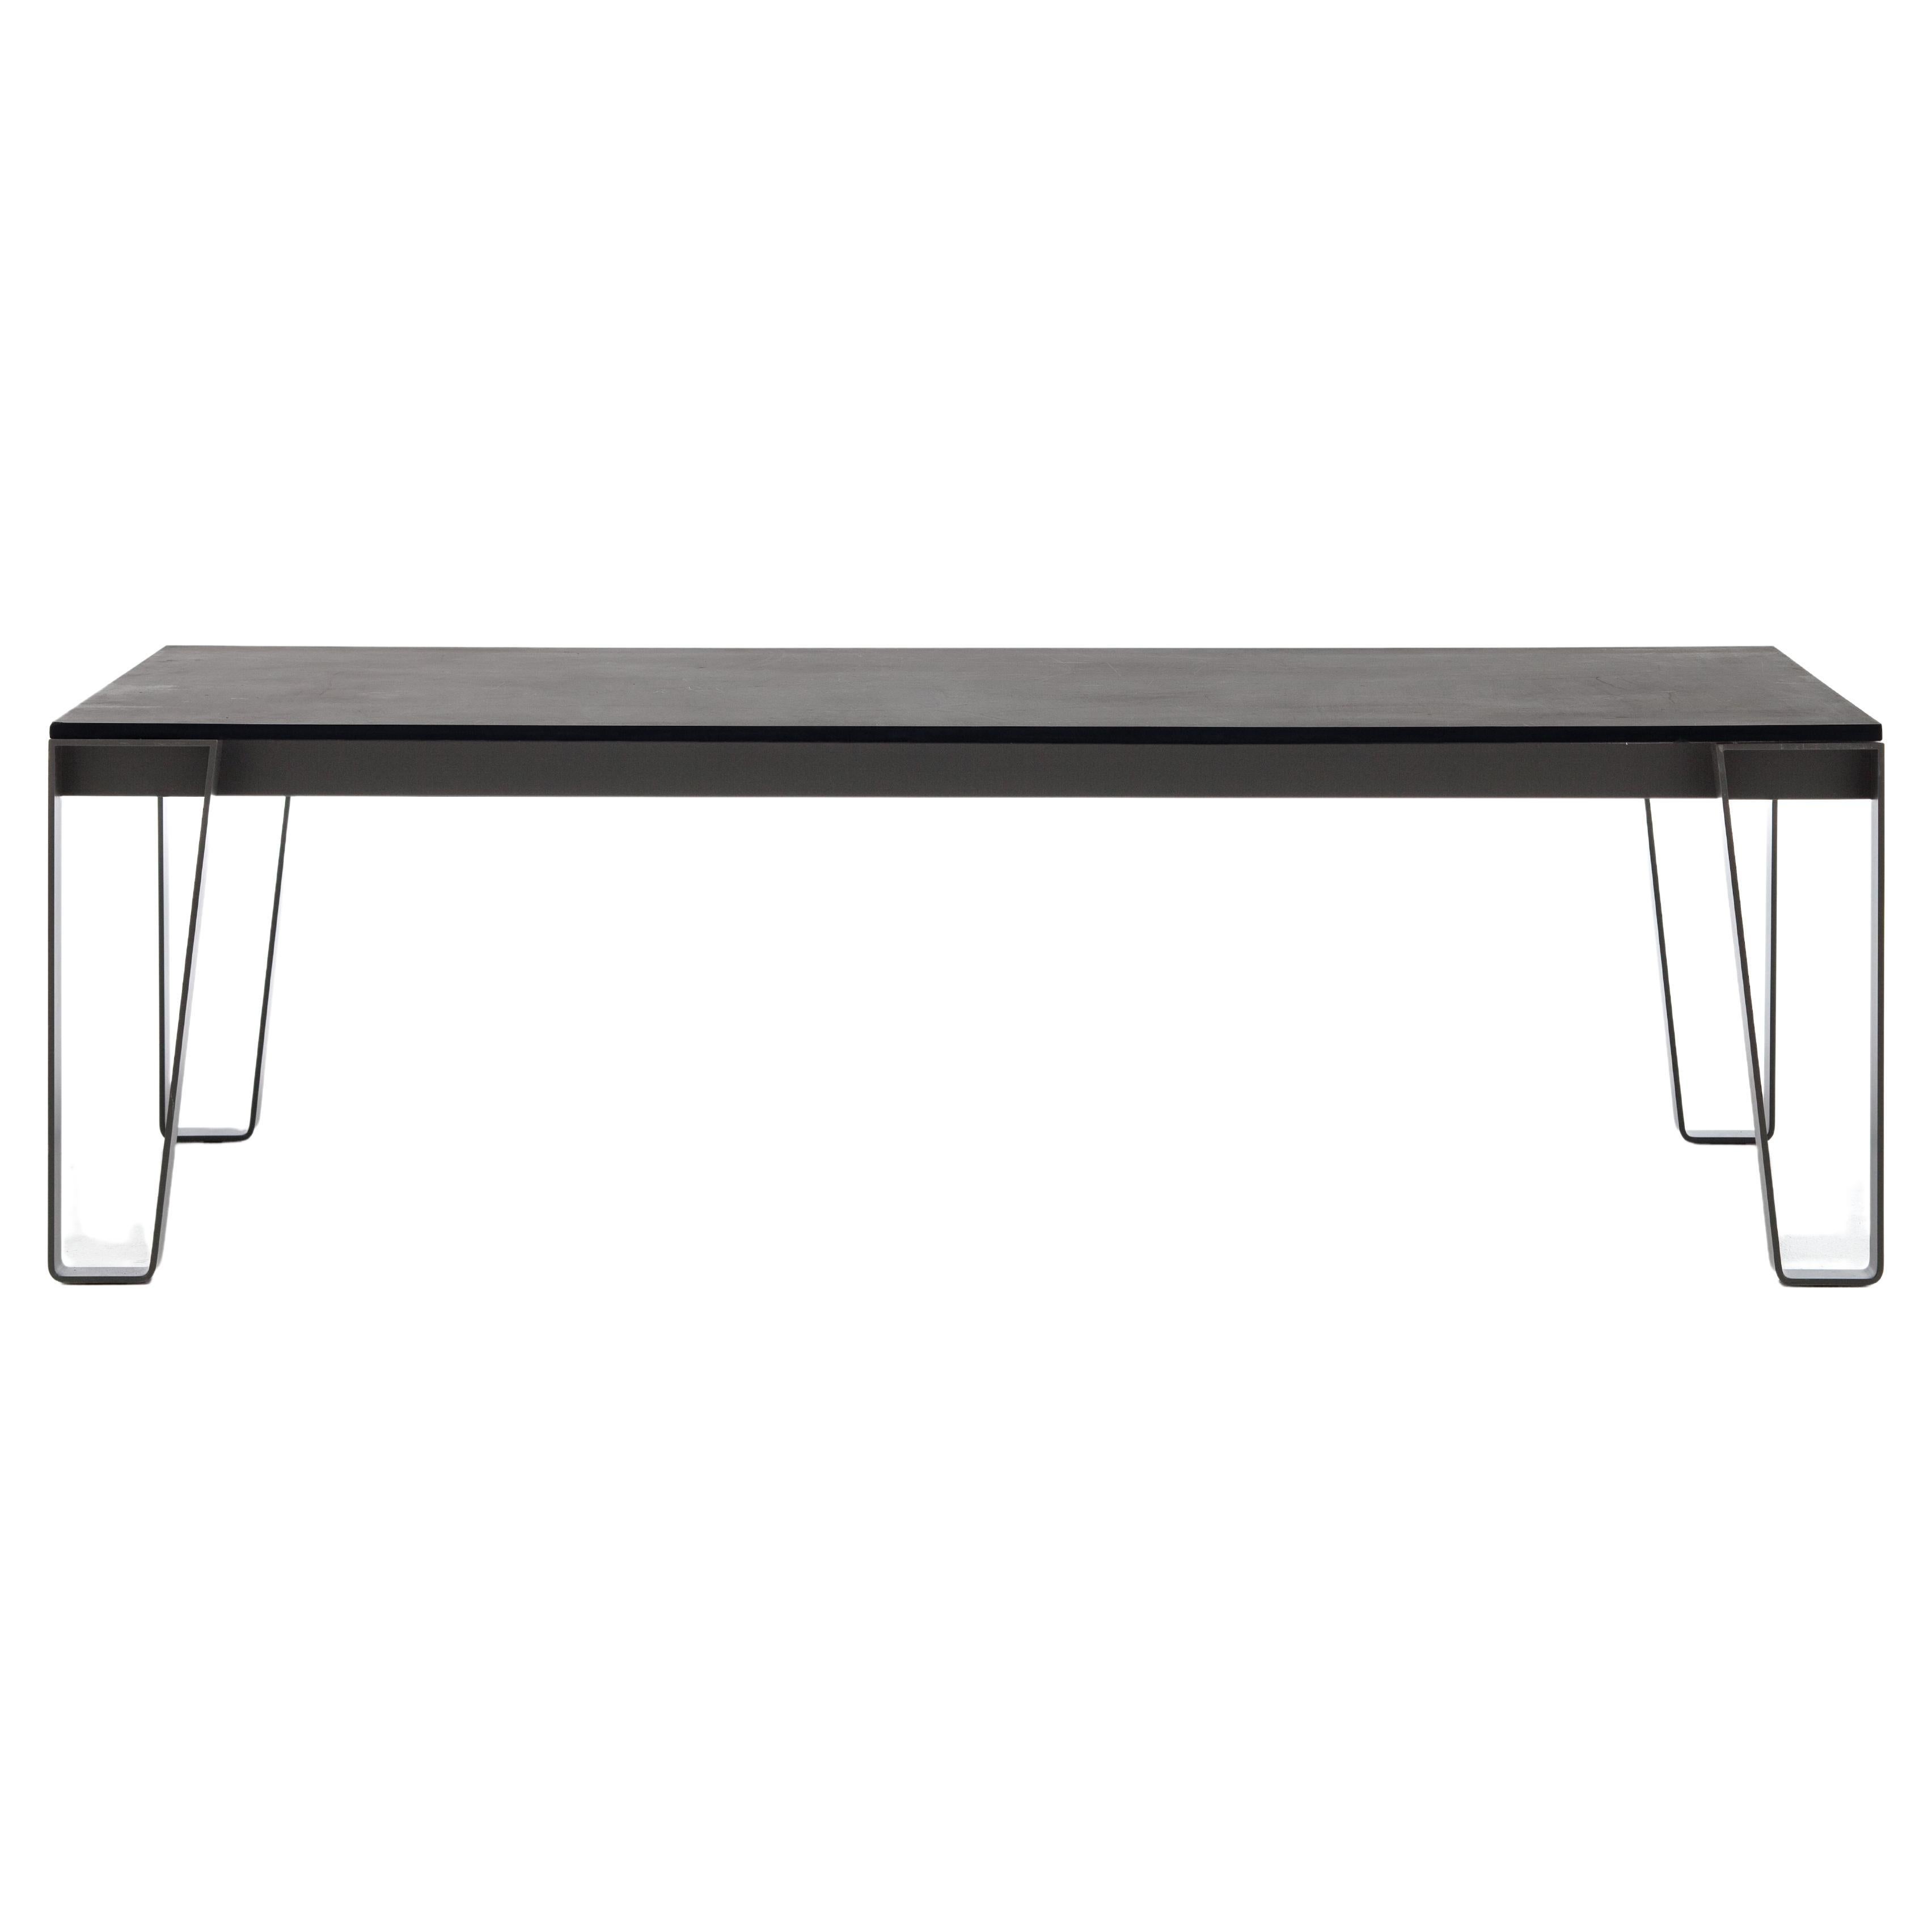 Gervasoni Large Inout 933 Table in Grey Porcelain Stoneware Top with Grey Frame